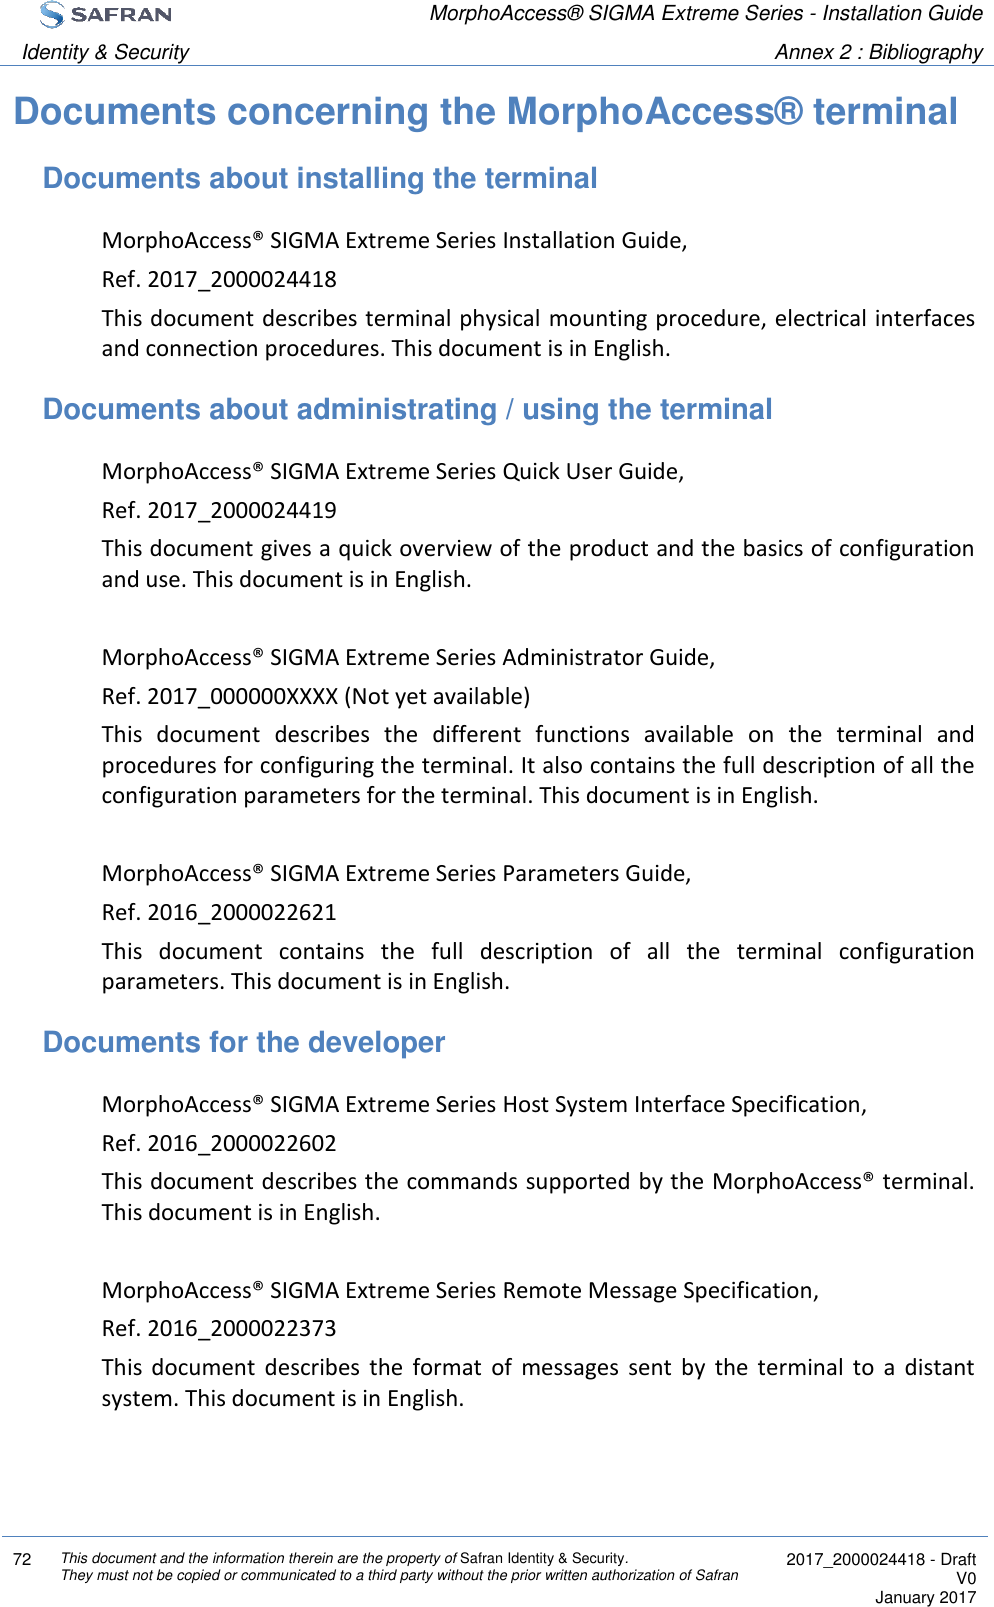  MorphoAccess® SIGMA Extreme Series - Installation Guide  Identity &amp; Security Annex 2 : Bibliography  72 This document and the information therein are the property of Safran Identity &amp; Security. They must not be copied or communicated to a third party without the prior written authorization of Safran  2017_2000024418 - Draft V0 January 2017  Documents concerning the MorphoAccess® terminal Documents about installing the terminal MorphoAccess® SIGMA Extreme Series Installation Guide, Ref. 2017_2000024418 This document describes terminal physical mounting procedure, electrical interfaces and connection procedures. This document is in English. Documents about administrating / using the terminal MorphoAccess® SIGMA Extreme Series Quick User Guide, Ref. 2017_2000024419 This document gives a quick overview of the product and the basics of configuration and use. This document is in English.  MorphoAccess® SIGMA Extreme Series Administrator Guide, Ref. 2017_000000XXXX (Not yet available) This  document  describes  the  different  functions  available  on  the  terminal  and procedures for configuring the terminal. It also contains the full description of all the configuration parameters for the terminal. This document is in English.  MorphoAccess® SIGMA Extreme Series Parameters Guide, Ref. 2016_2000022621 This  document  contains  the  full  description  of  all  the  terminal  configuration parameters. This document is in English. Documents for the developer MorphoAccess® SIGMA Extreme Series Host System Interface Specification, Ref. 2016_2000022602 This document describes the commands supported by the MorphoAccess® terminal. This document is in English.  MorphoAccess® SIGMA Extreme Series Remote Message Specification, Ref. 2016_2000022373 This  document  describes  the  format  of  messages  sent  by  the  terminal  to  a  distant system. This document is in English. 